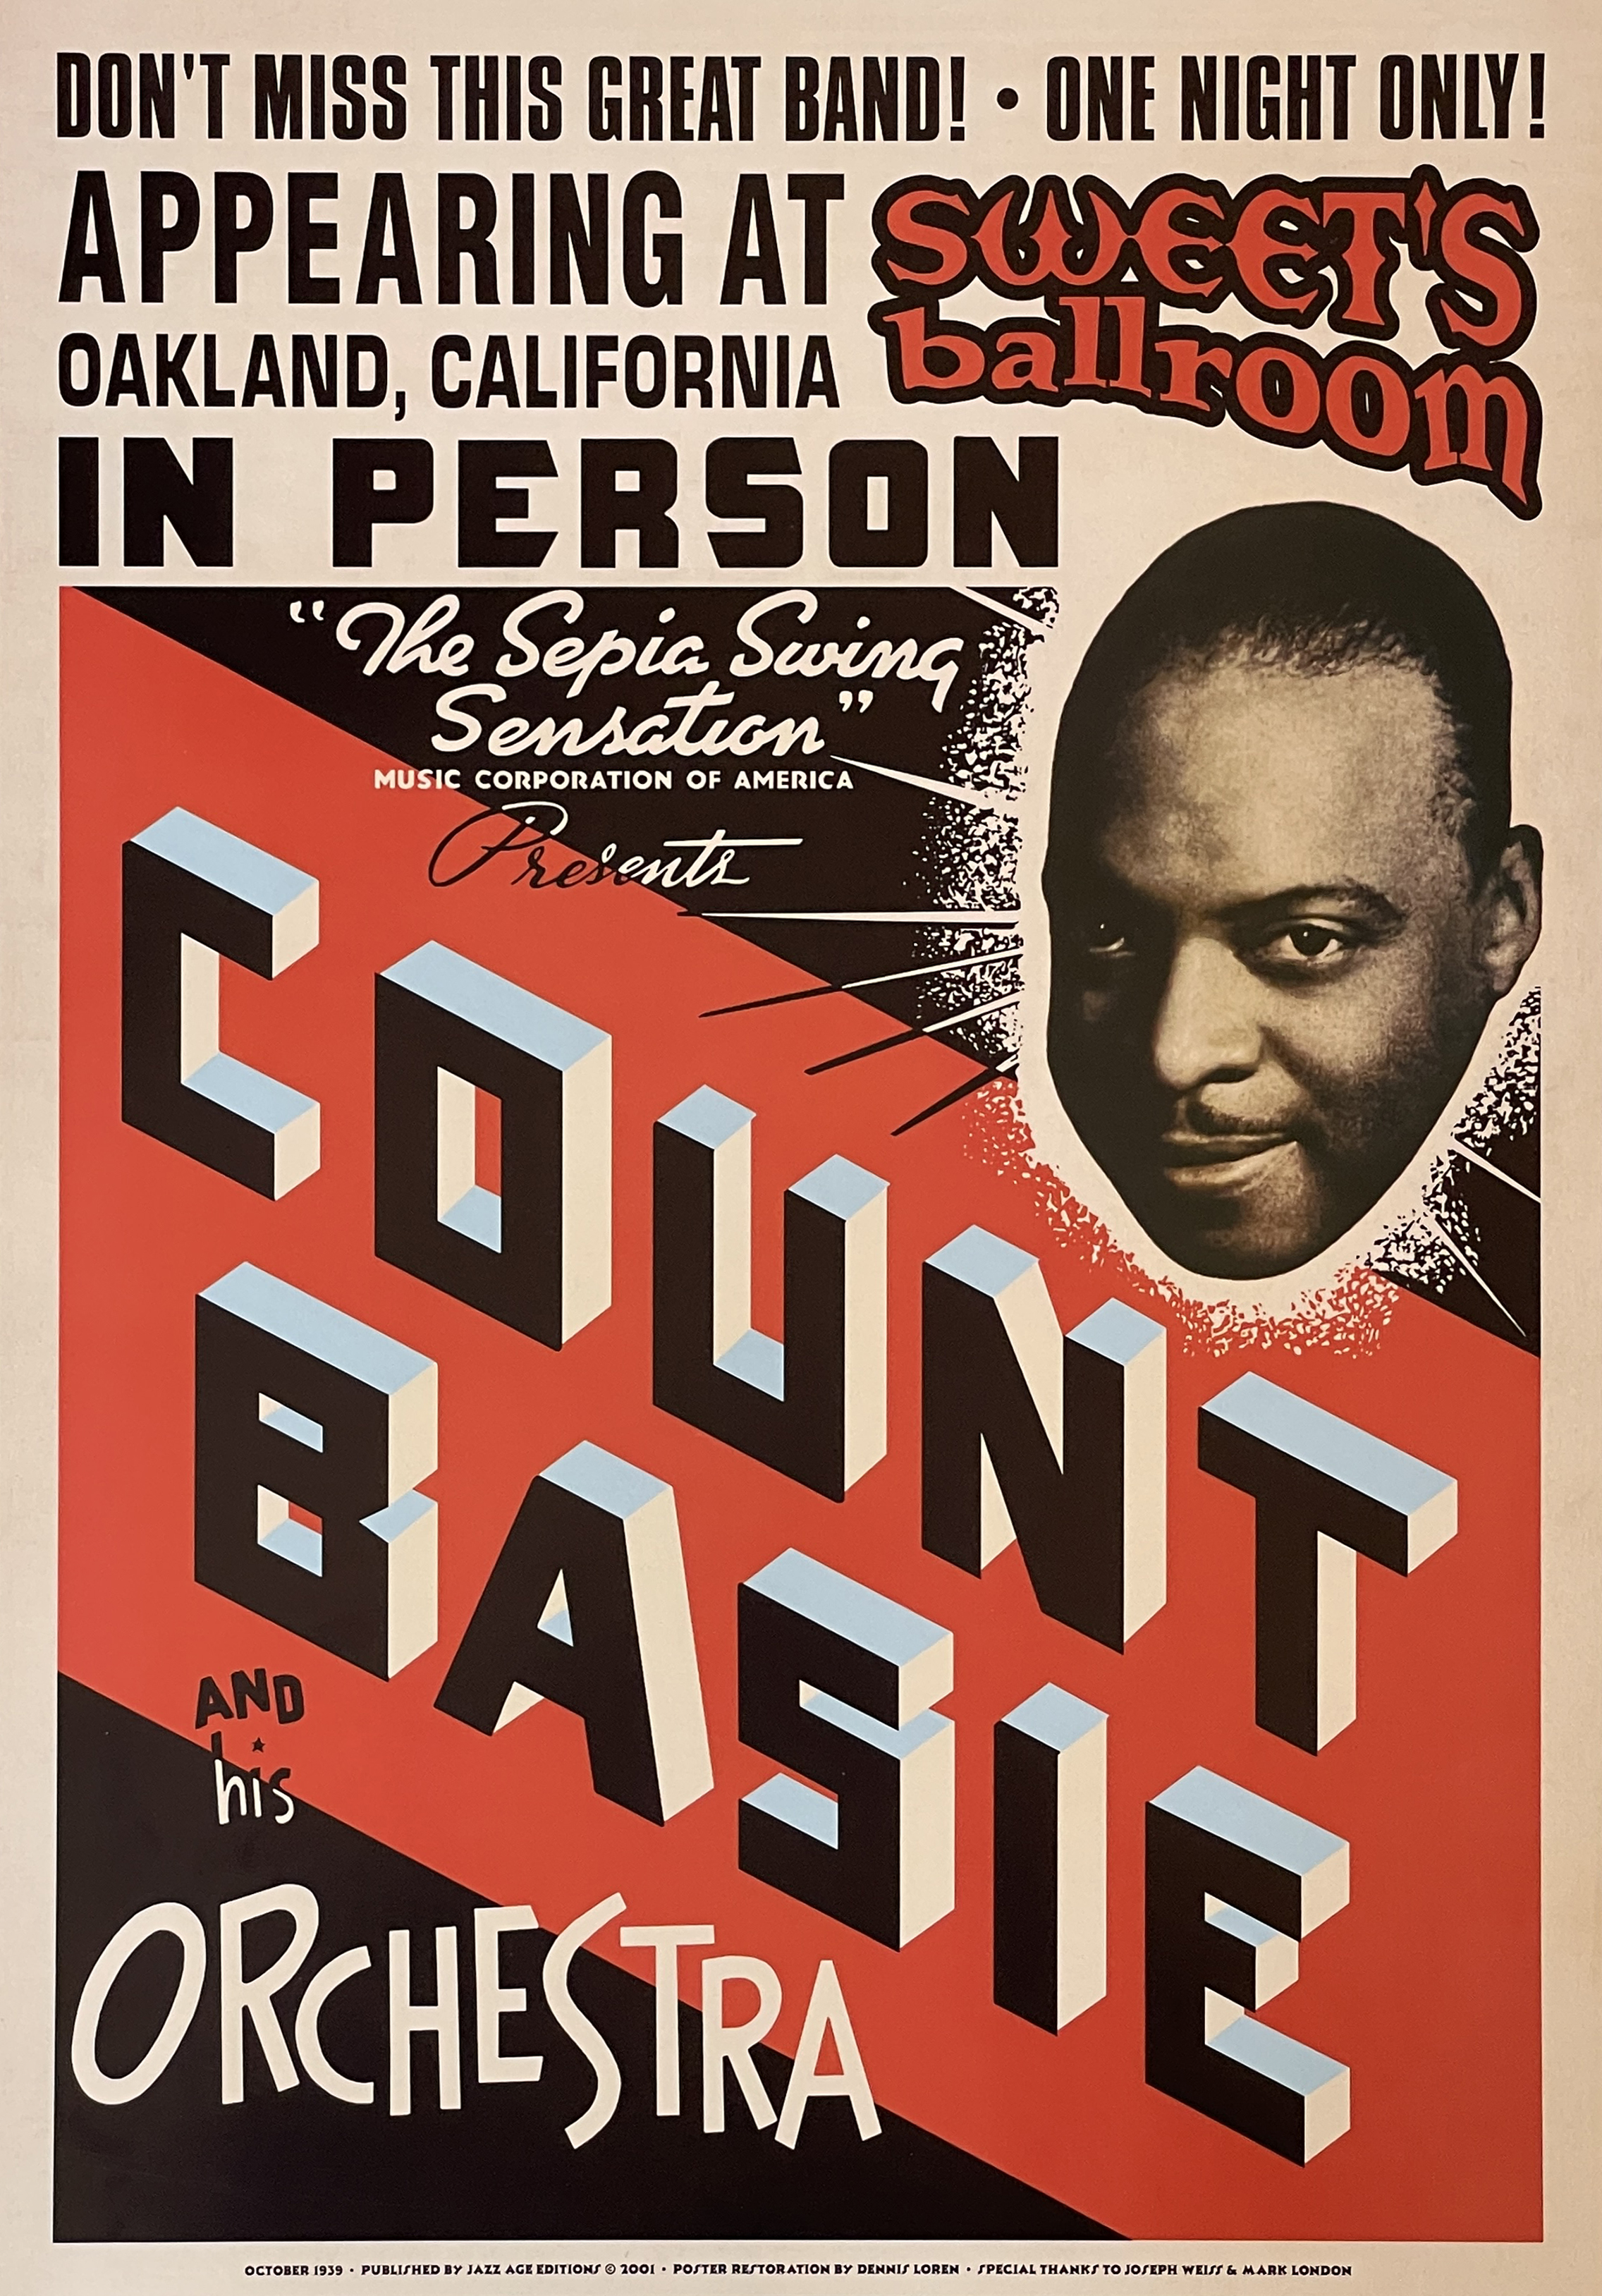 Count Basie and His Orchetsra